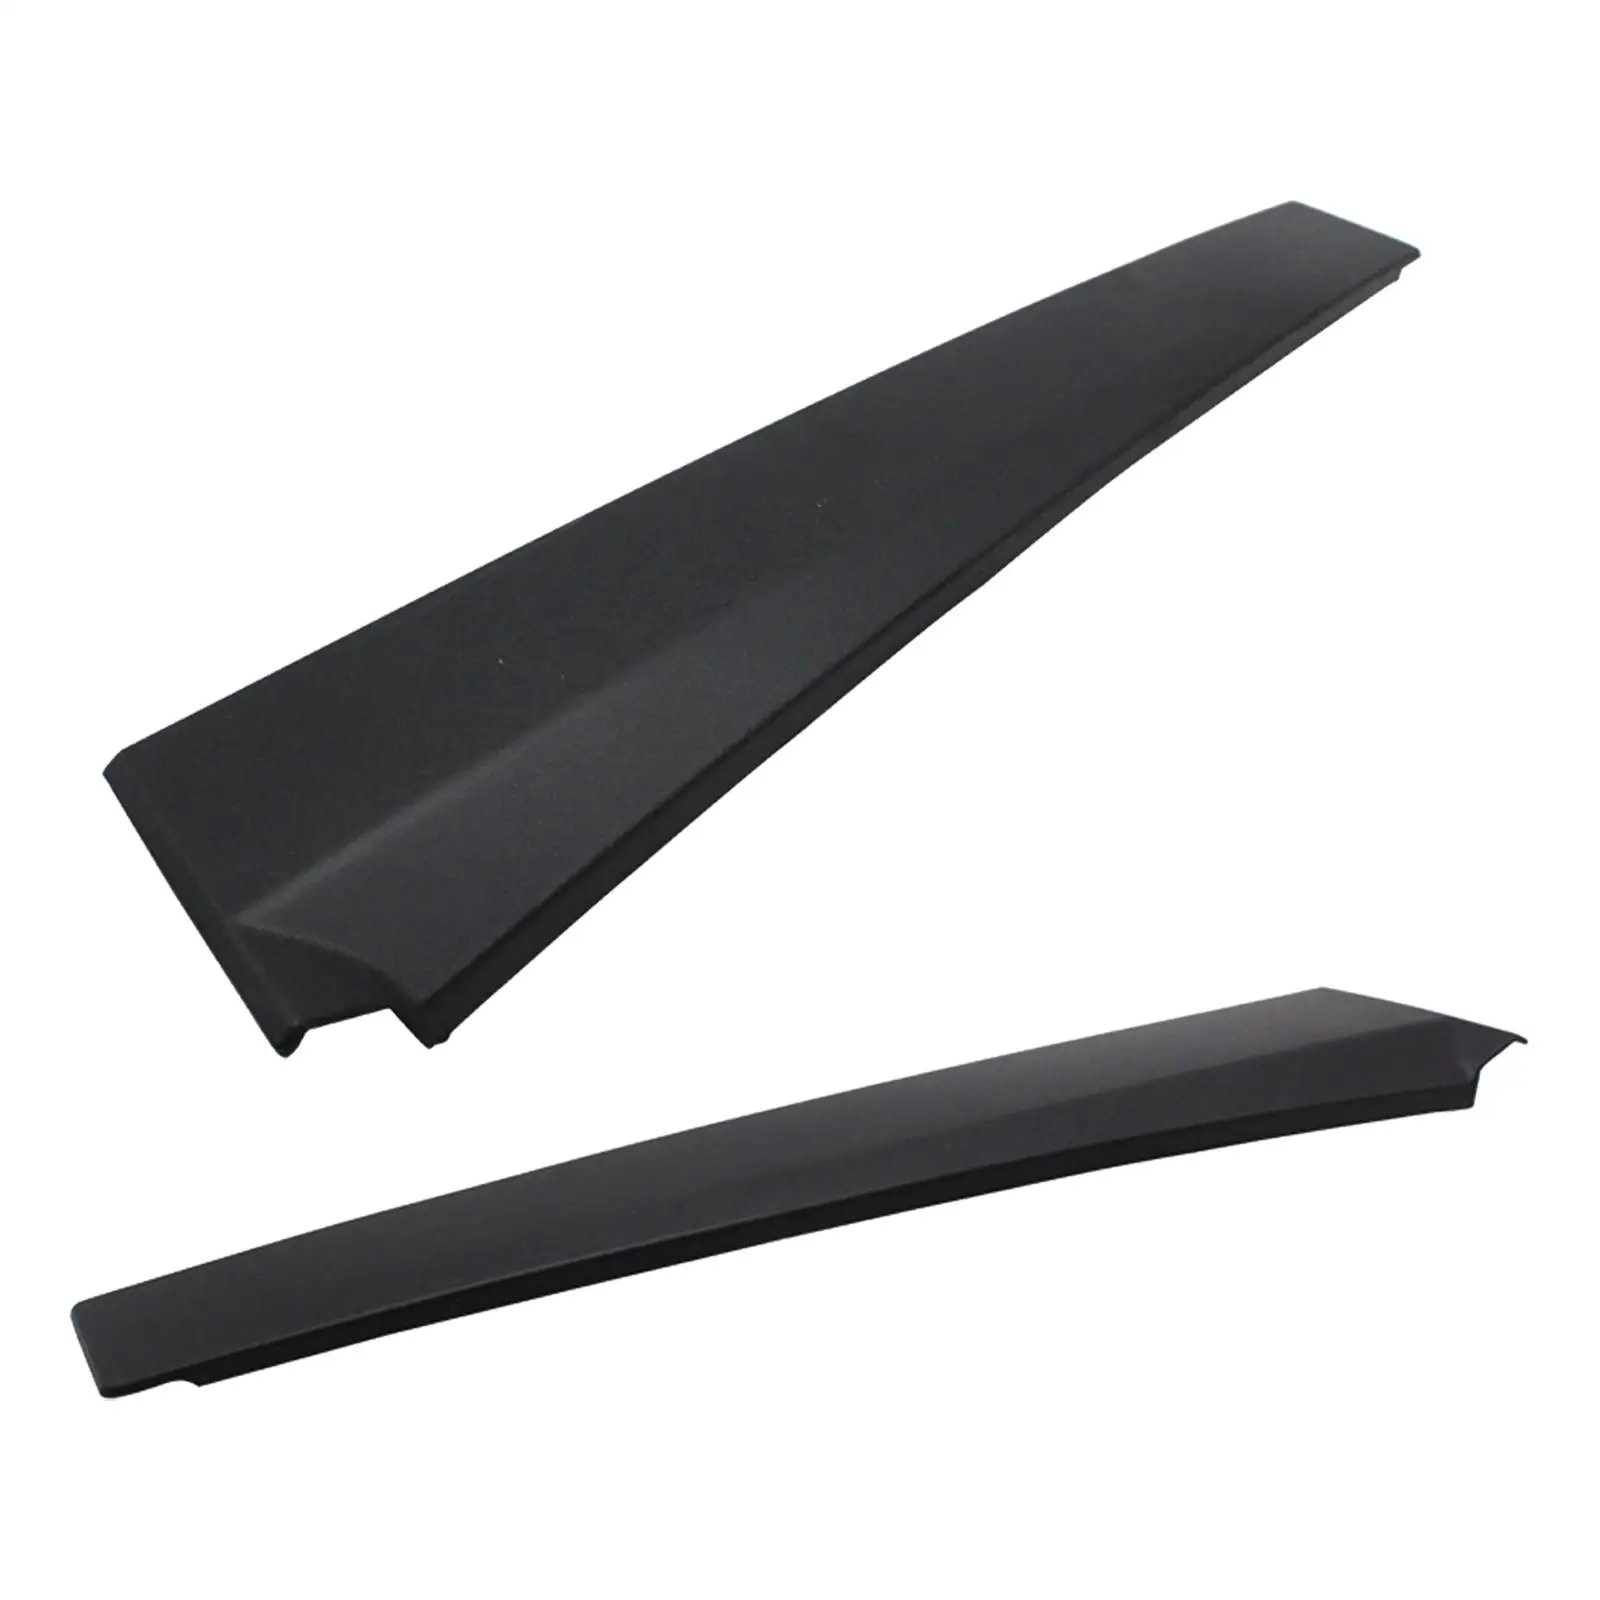 Vehicle Door Pillar Trim Moulding 1473662 2S51 B20898Ag 2S51B20898Ag for Ford Fiesta MK6 2001-2008 Accessories Durable